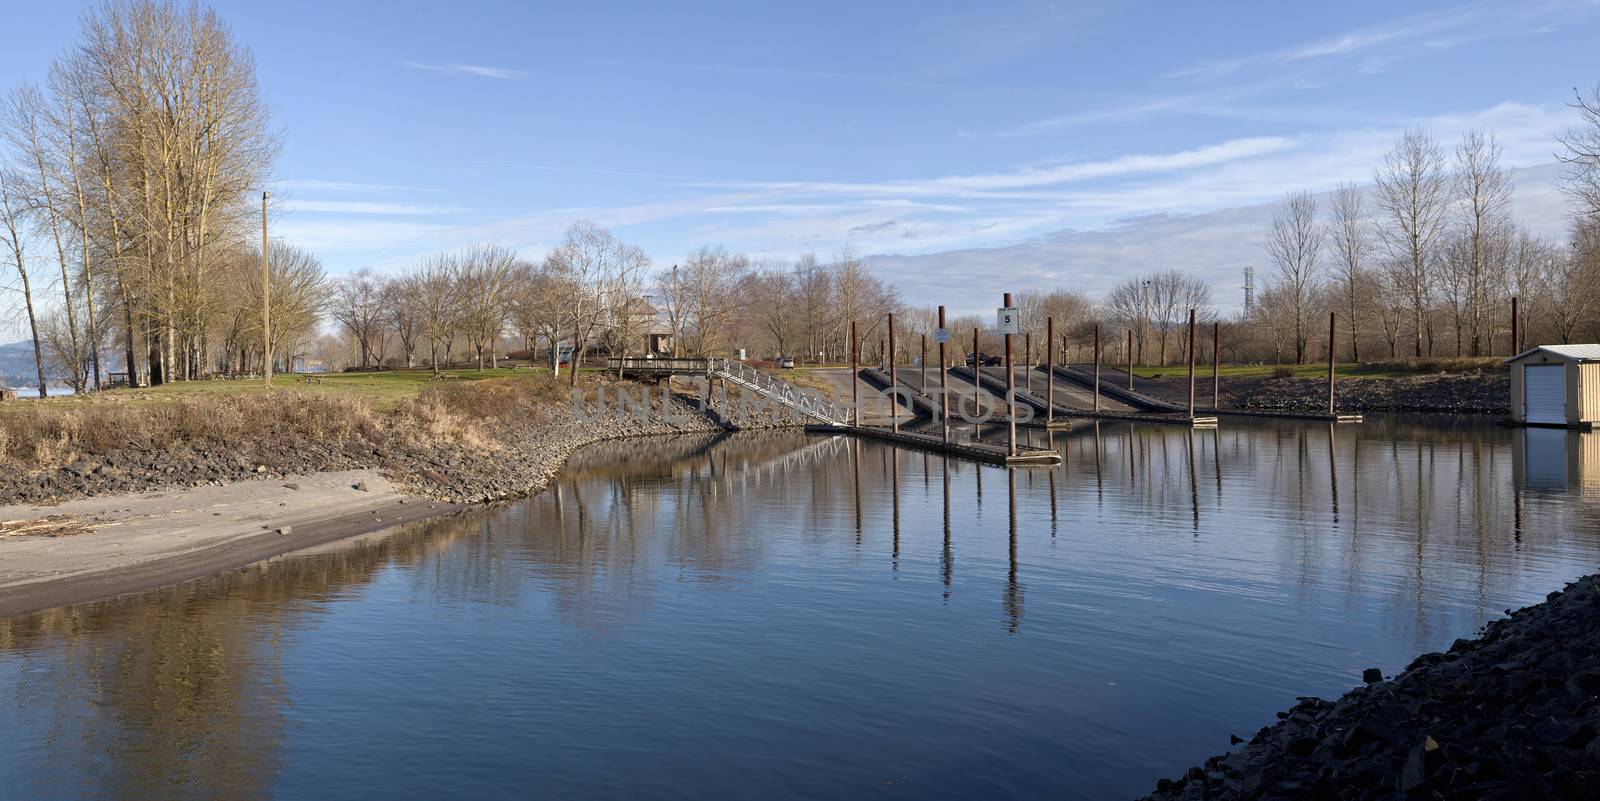 Boat launch wooden platforms and steel beams panoramic view Oregon.